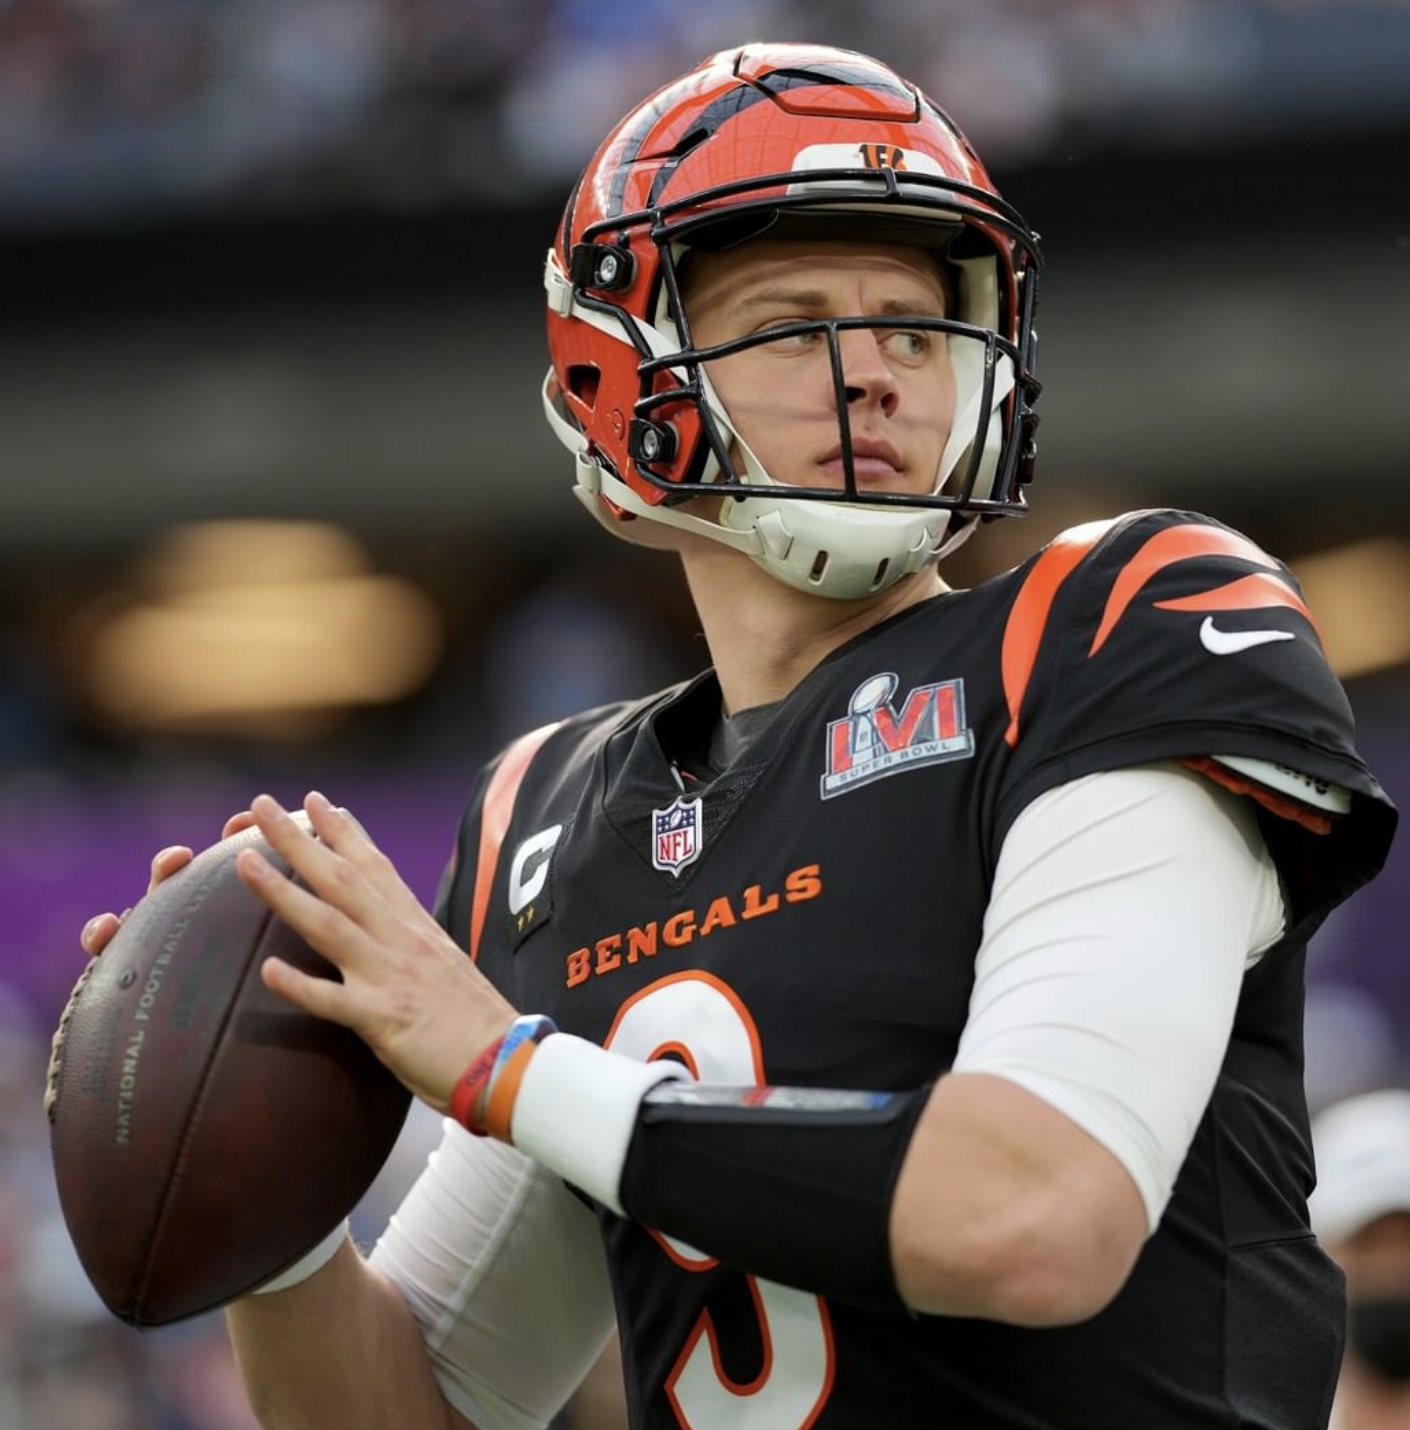 Bengals Quarterback Joe Burrow to Throw Out First Pitch at